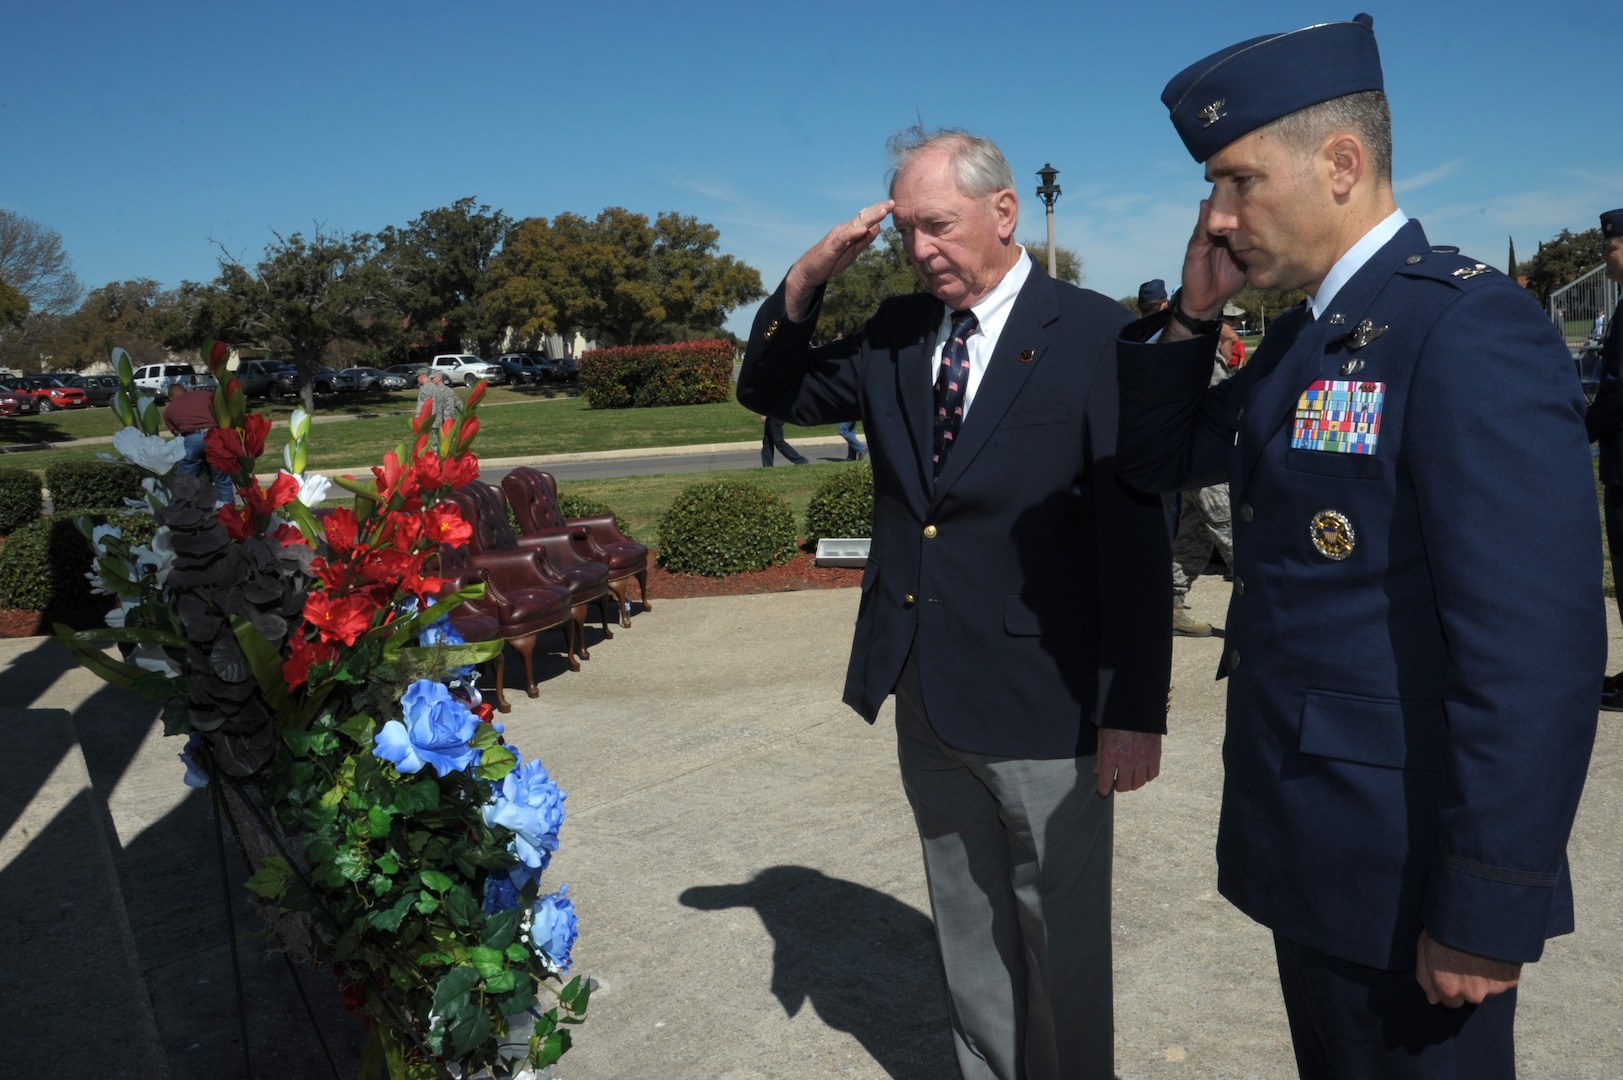 Col. Matthew Isler (right), 12th Flying Training Wing commander, and retired Air Force Col. Robert Certain, salute during the wreath presentation at the Missing Man Monument at Joint Base San Antonio-Randolph, Texas, March 4, 2016.  The wreath-laying ceremony was part of the 43rd annual Freedom Flyer Reunion hosted at the base.